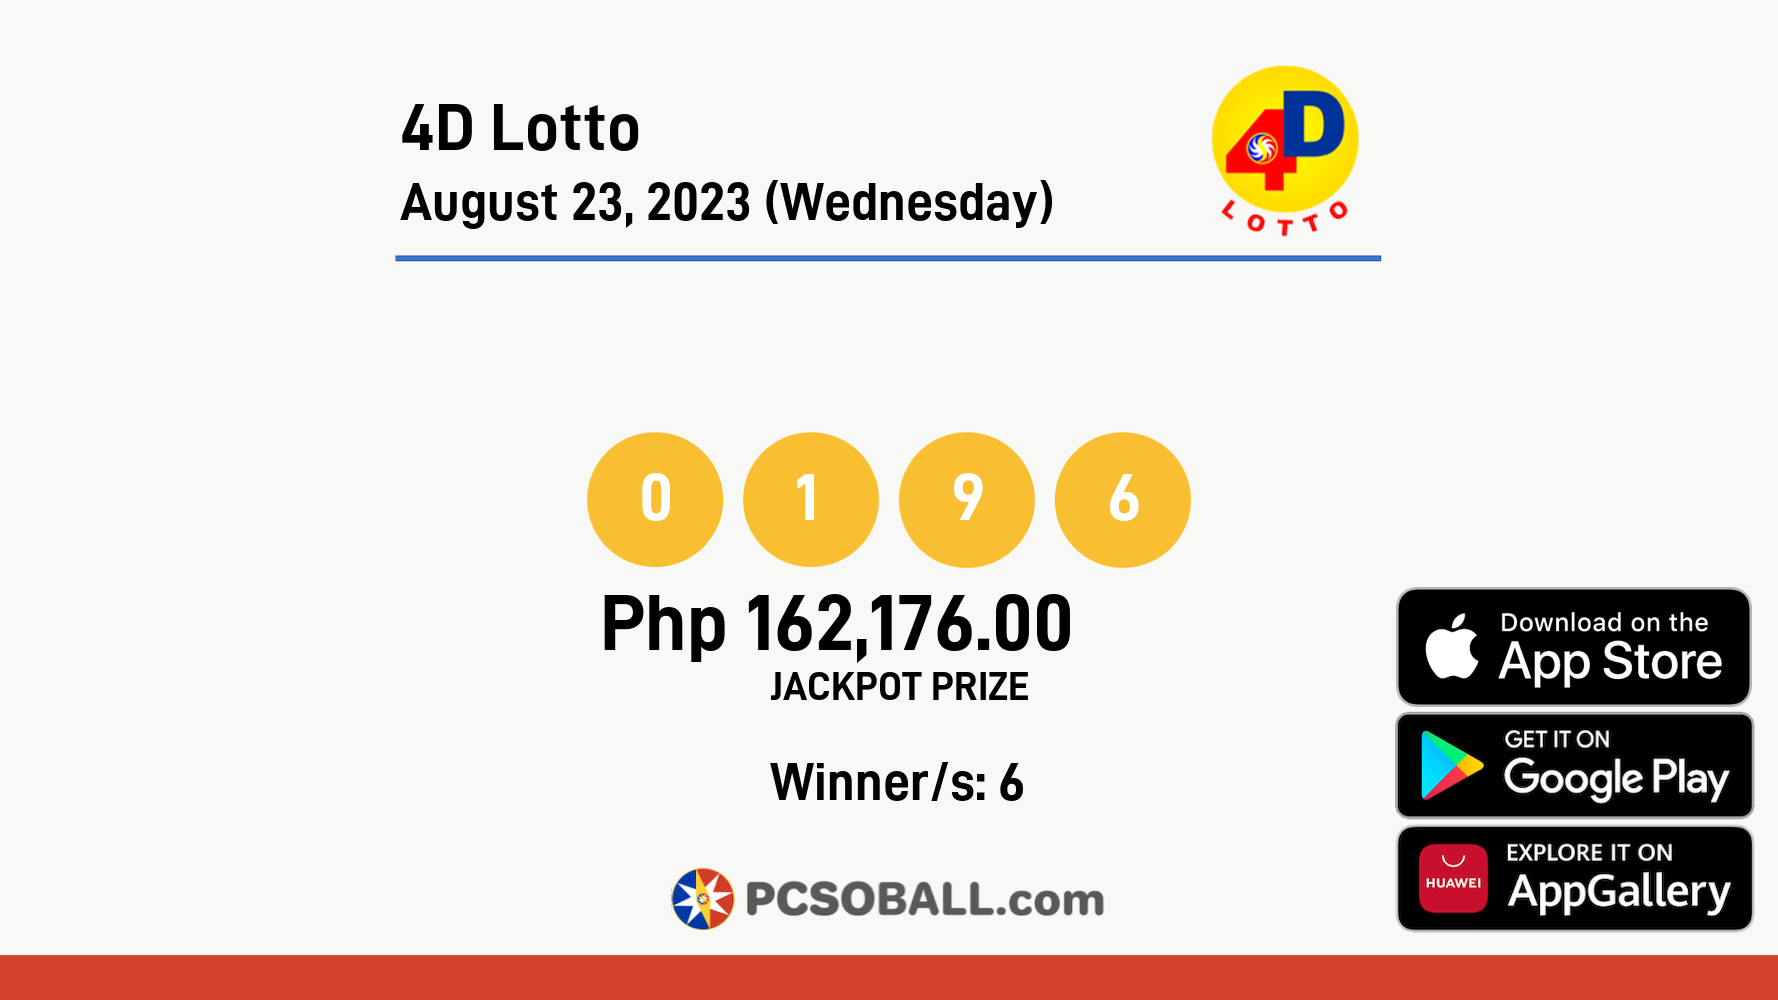 4D Lotto August 23, 2023 (Wednesday) Result